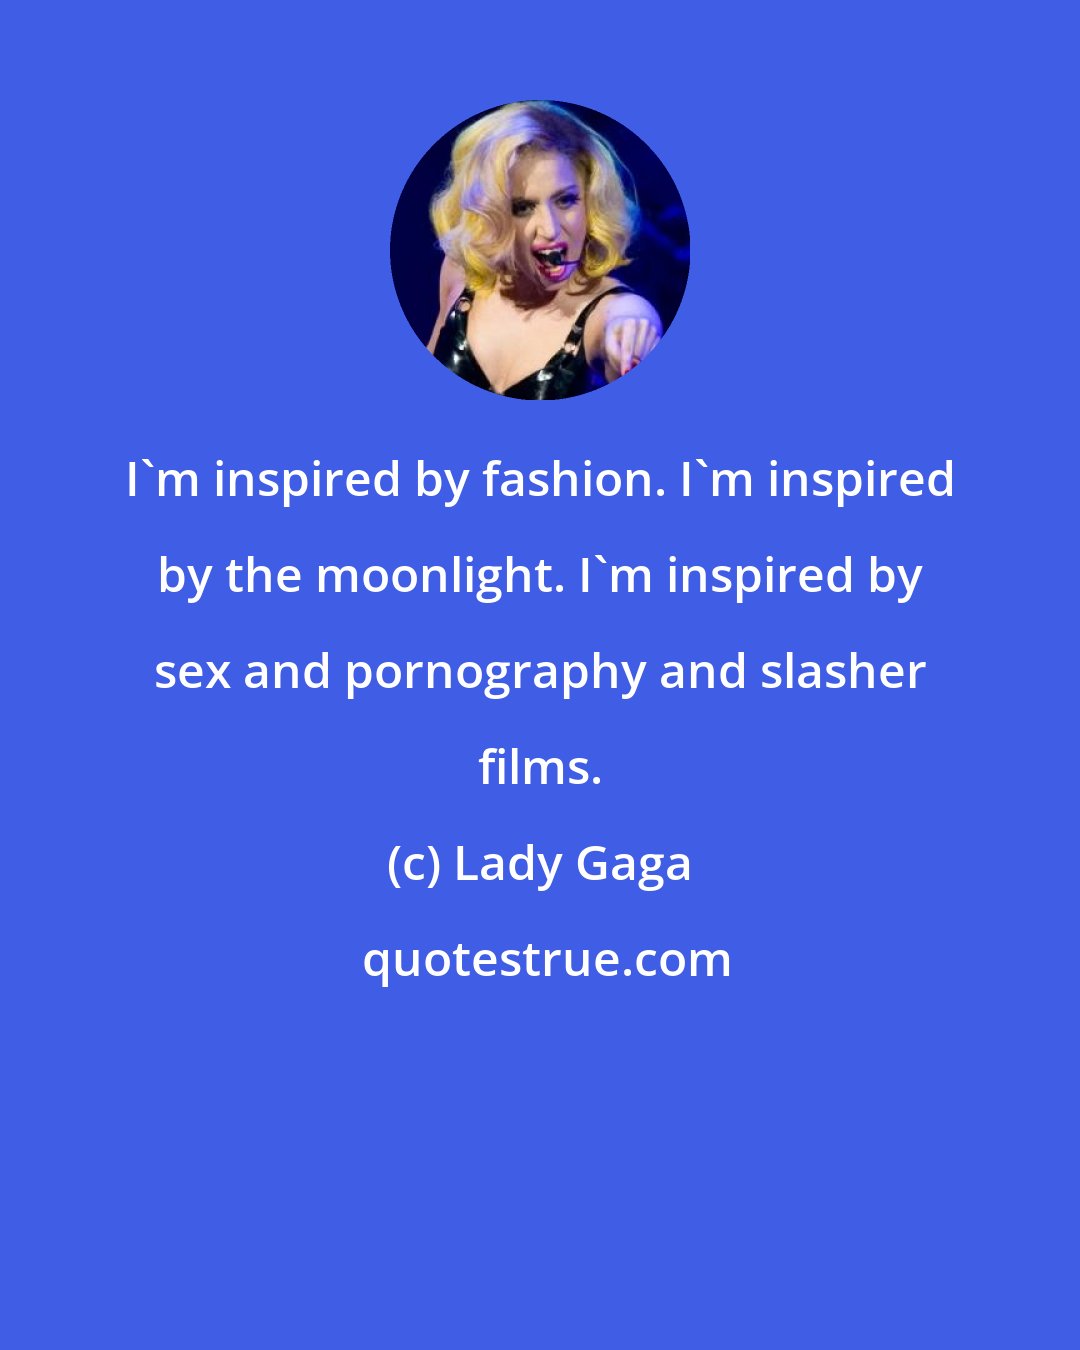 Lady Gaga: I'm inspired by fashion. I'm inspired by the moonlight. I'm inspired by sex and pornography and slasher films.